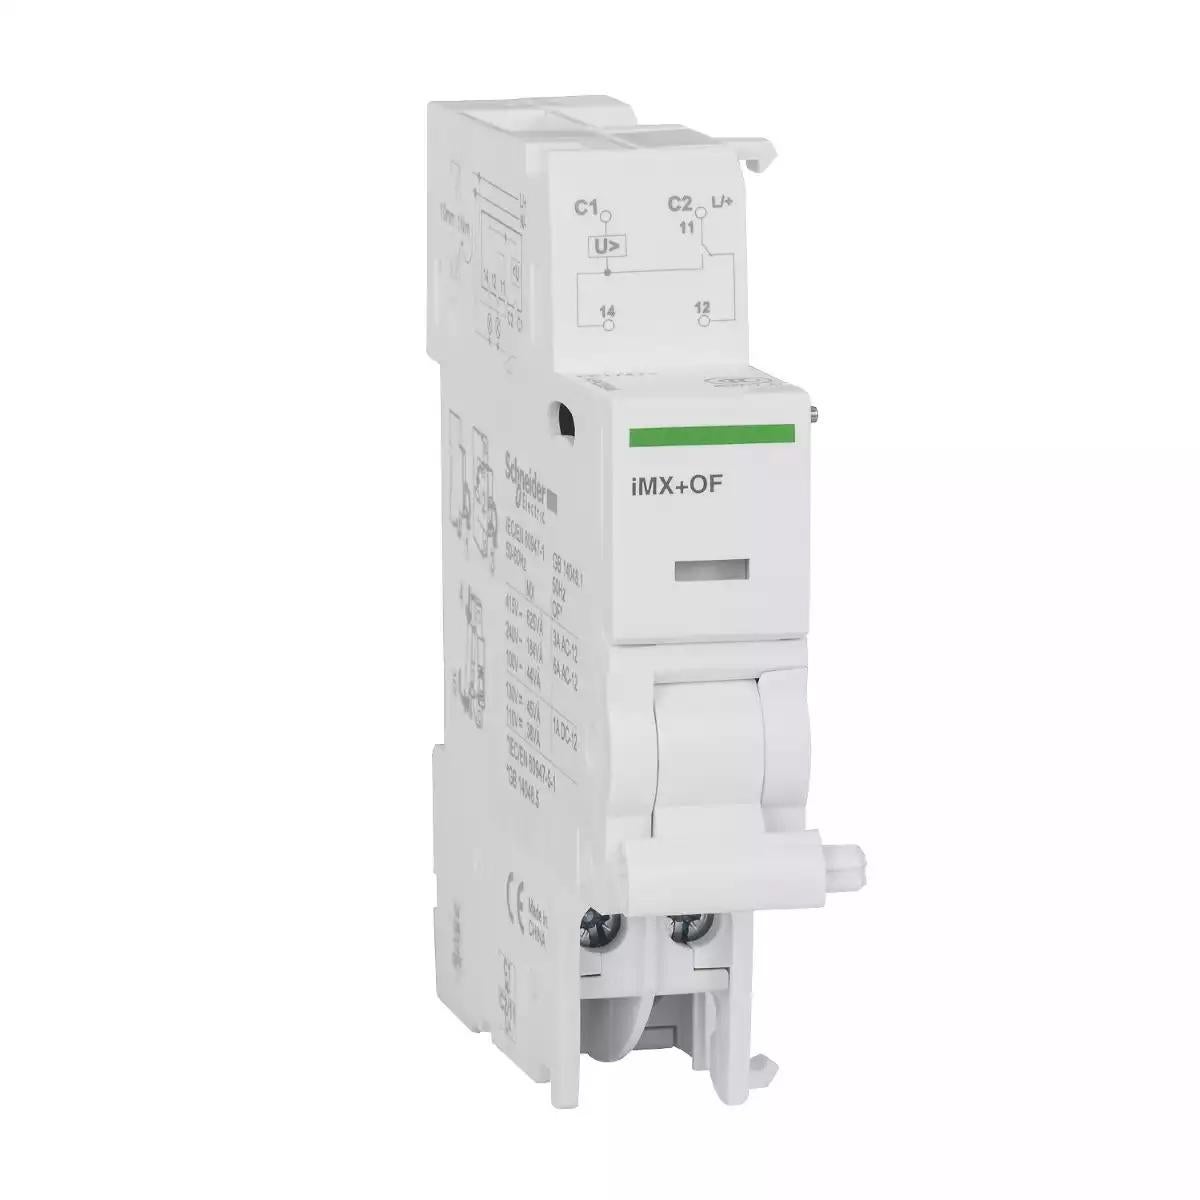 Voltage release - iMX+OF - tripping unit - 220..415 VAC